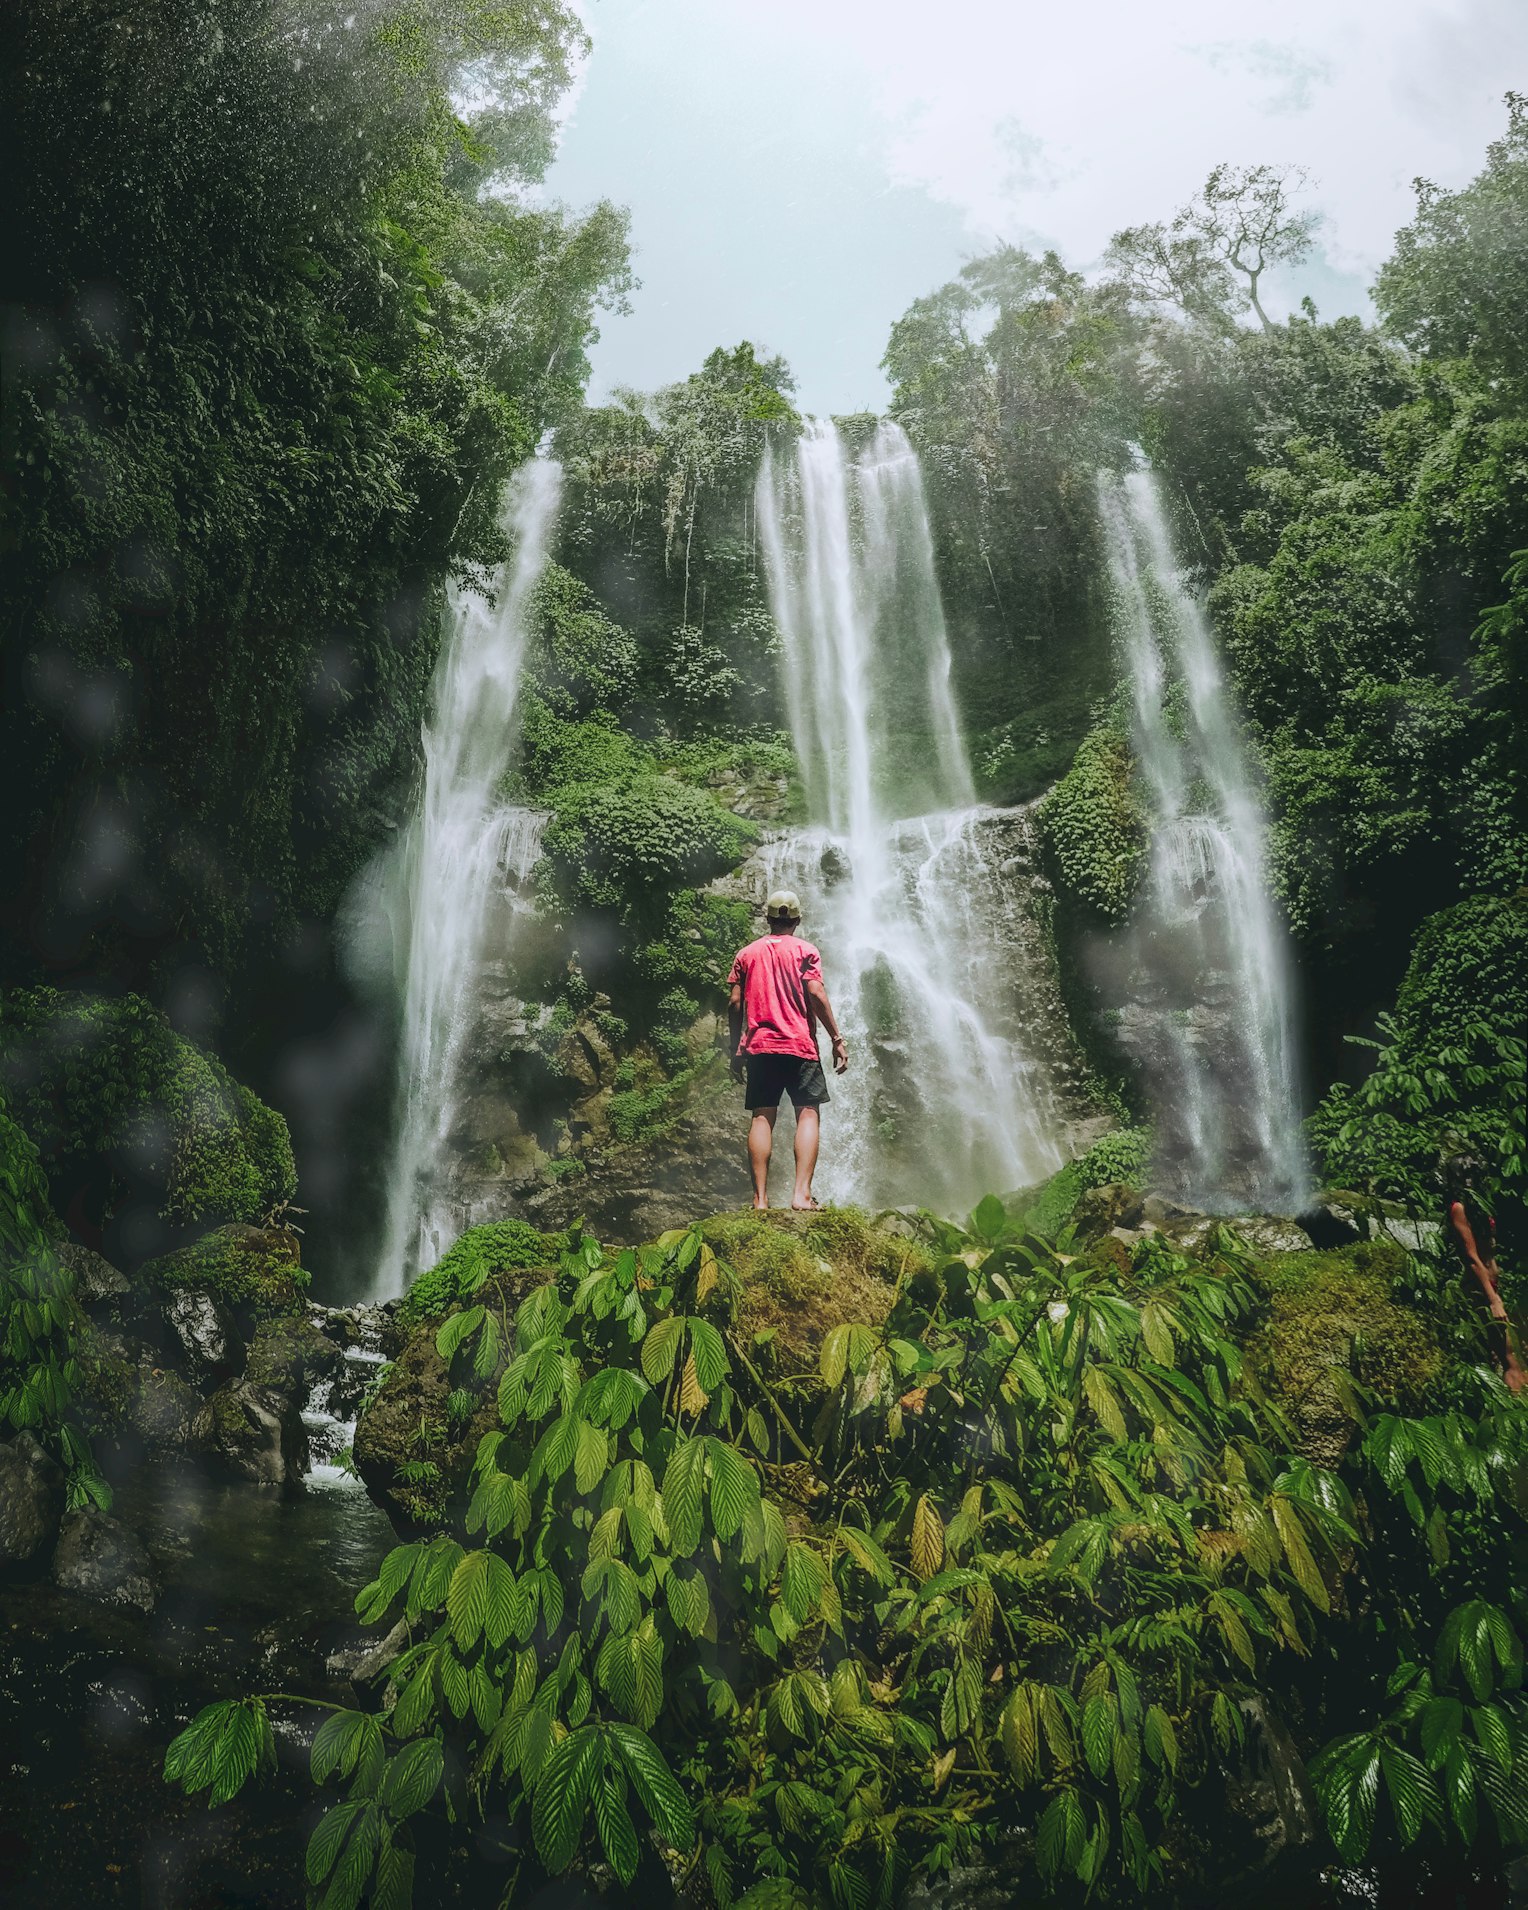 A lone individual stands in awe before the majestic Sekumpul Waterfall in Bali, Indonesia, which cascades over lush, green cliffs into a misty pool below, surrounded by the dense tropical rainforest